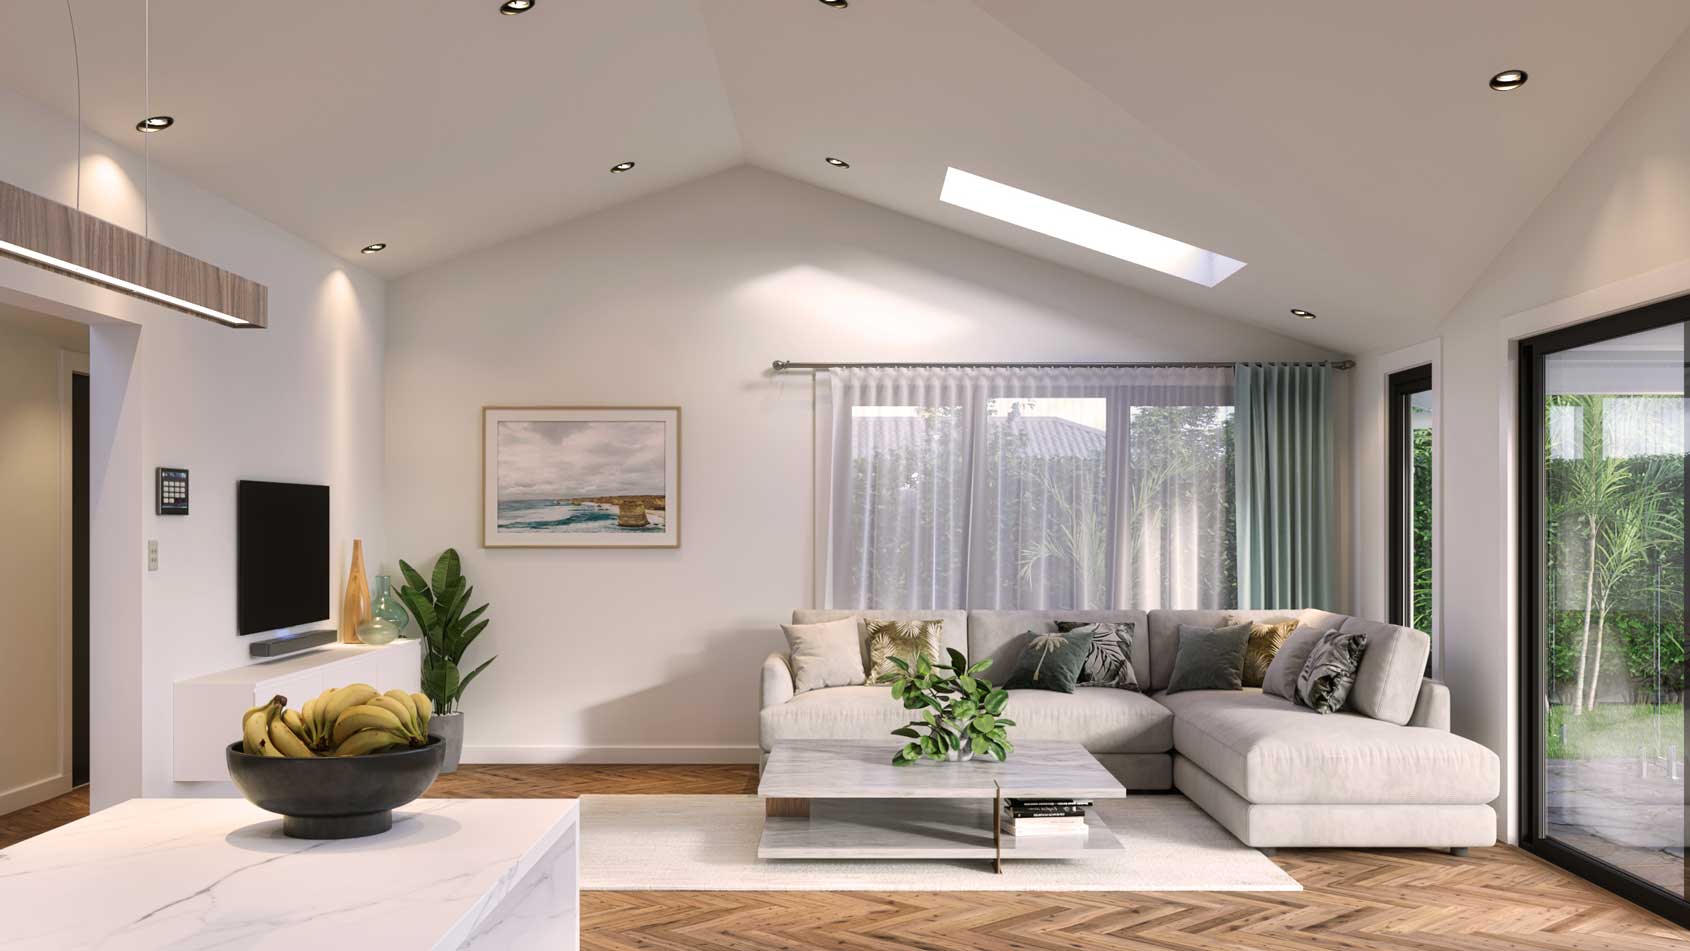 Skylights introduce light from above, filling the room with a soft, diffused glow and giving the room a more spacious and airy feel.